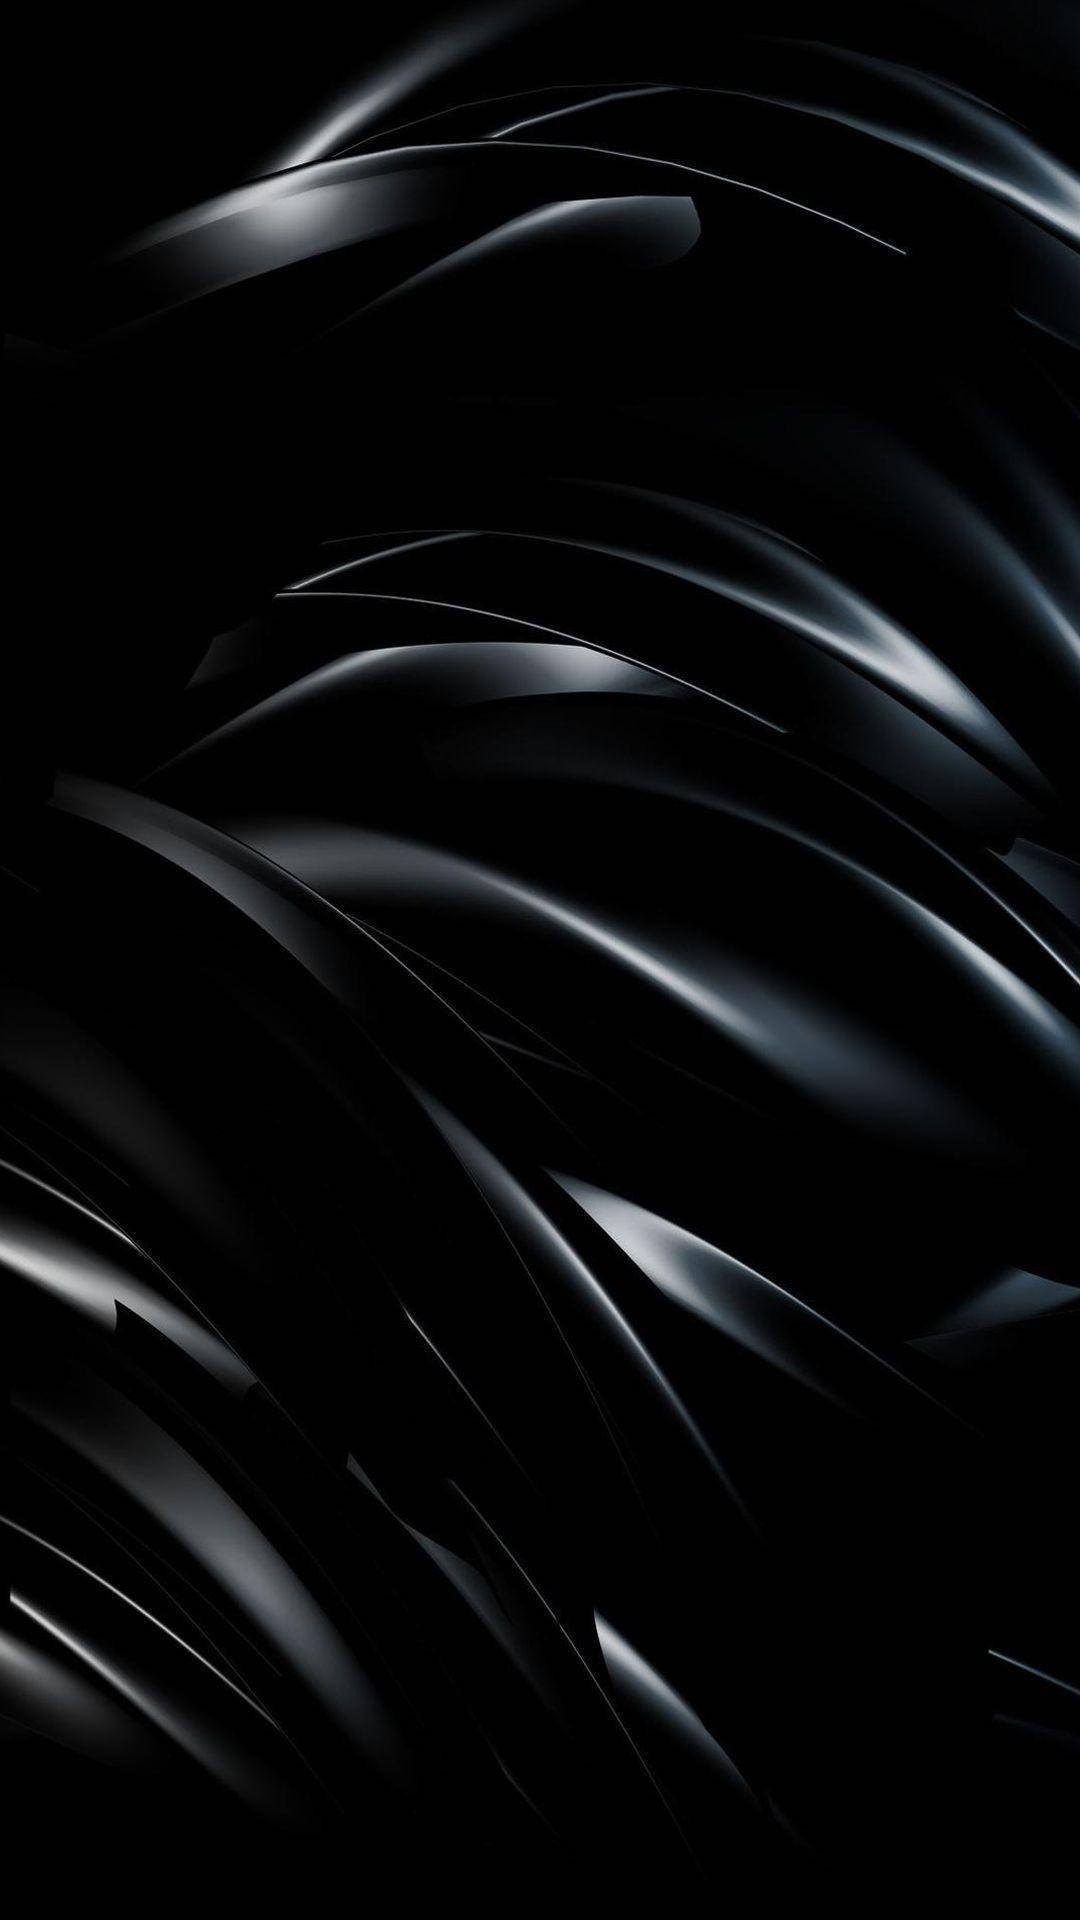 Metal-like Abstract Coils Iphone 8 Live Wallpaper